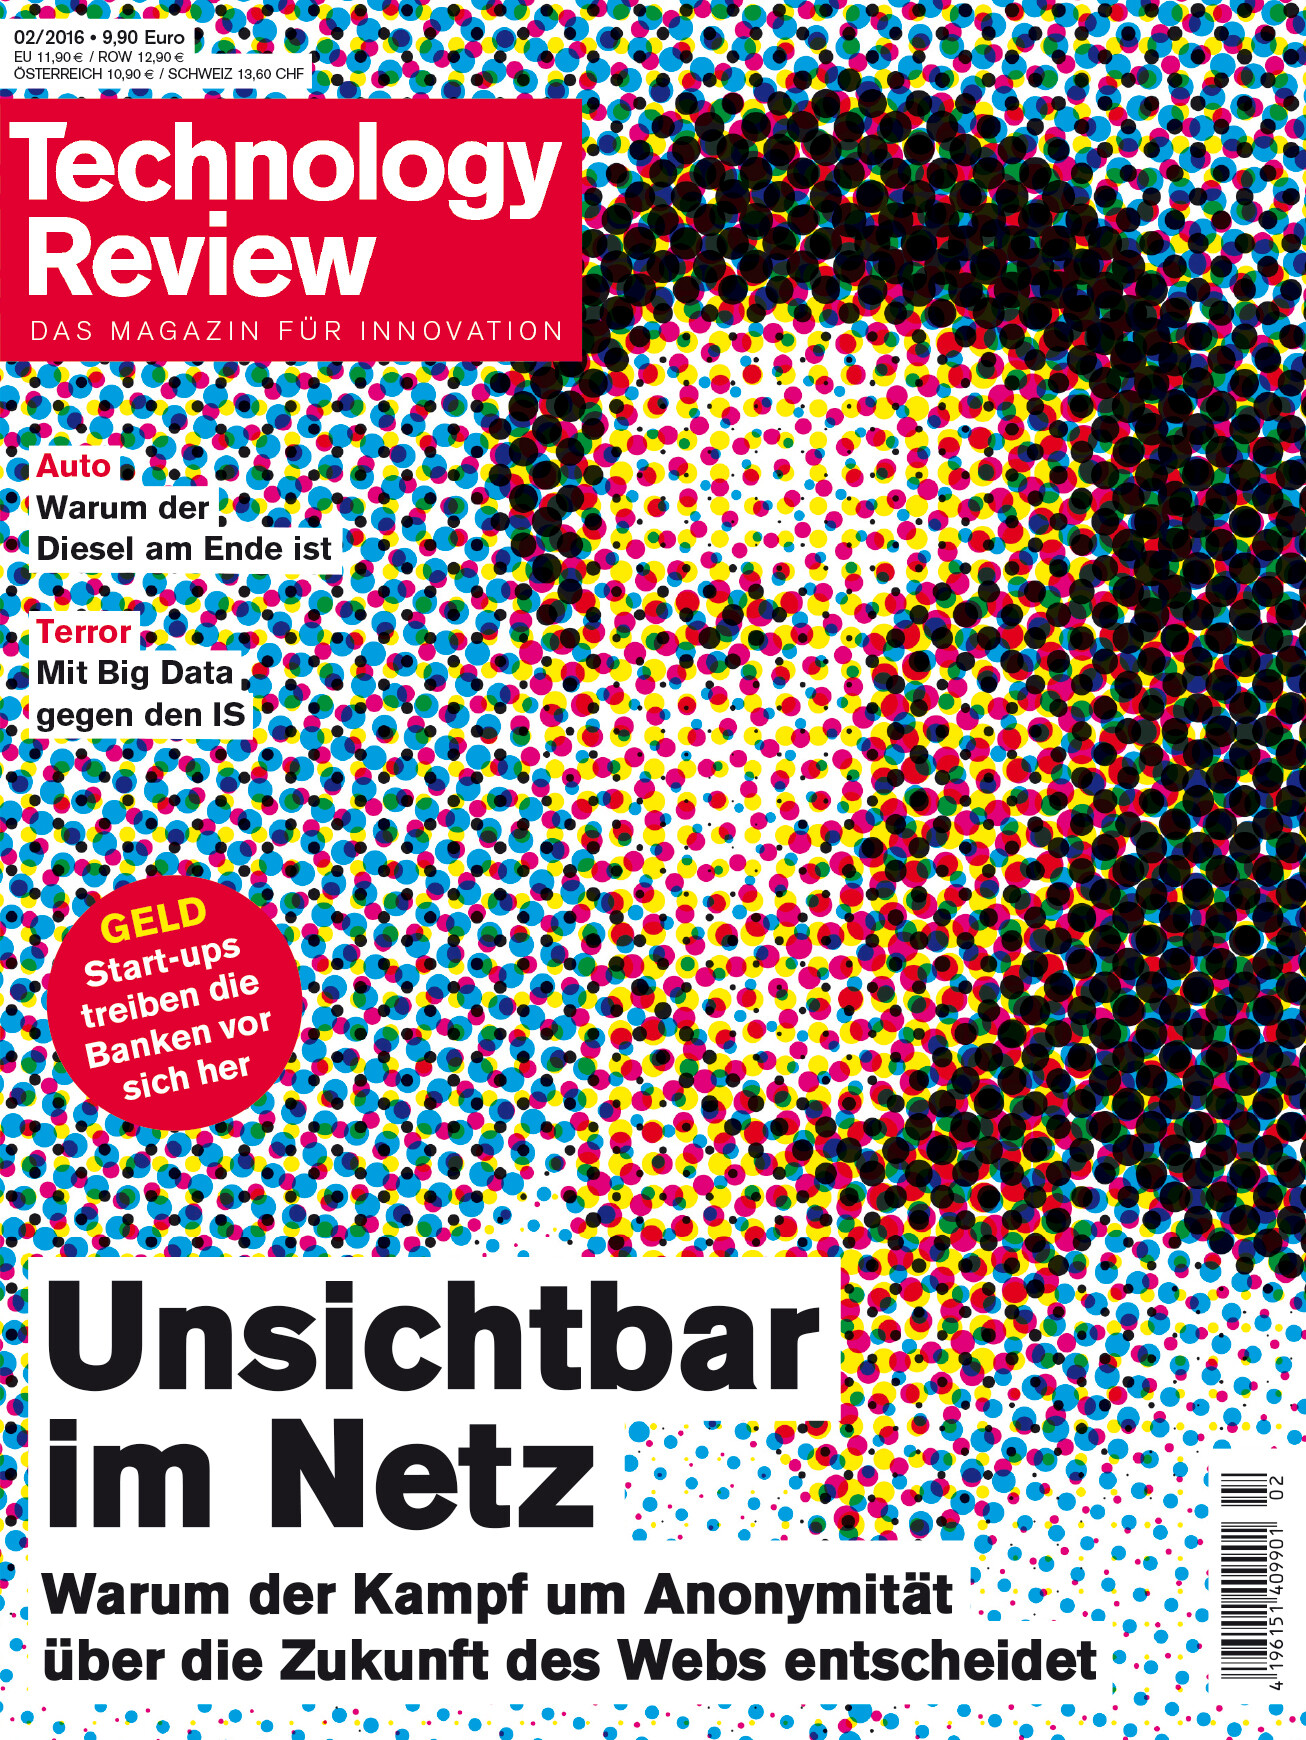 Technology Review 02/2016